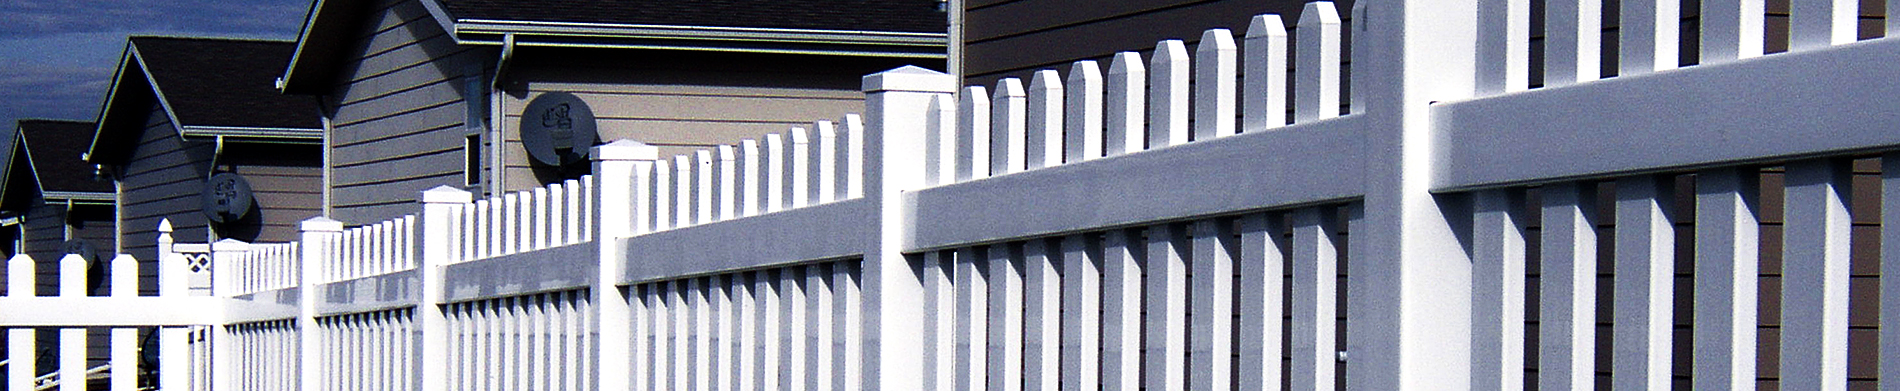 The Ultimate Guide to Buy Vinyl Fencing or Wooden Fencing